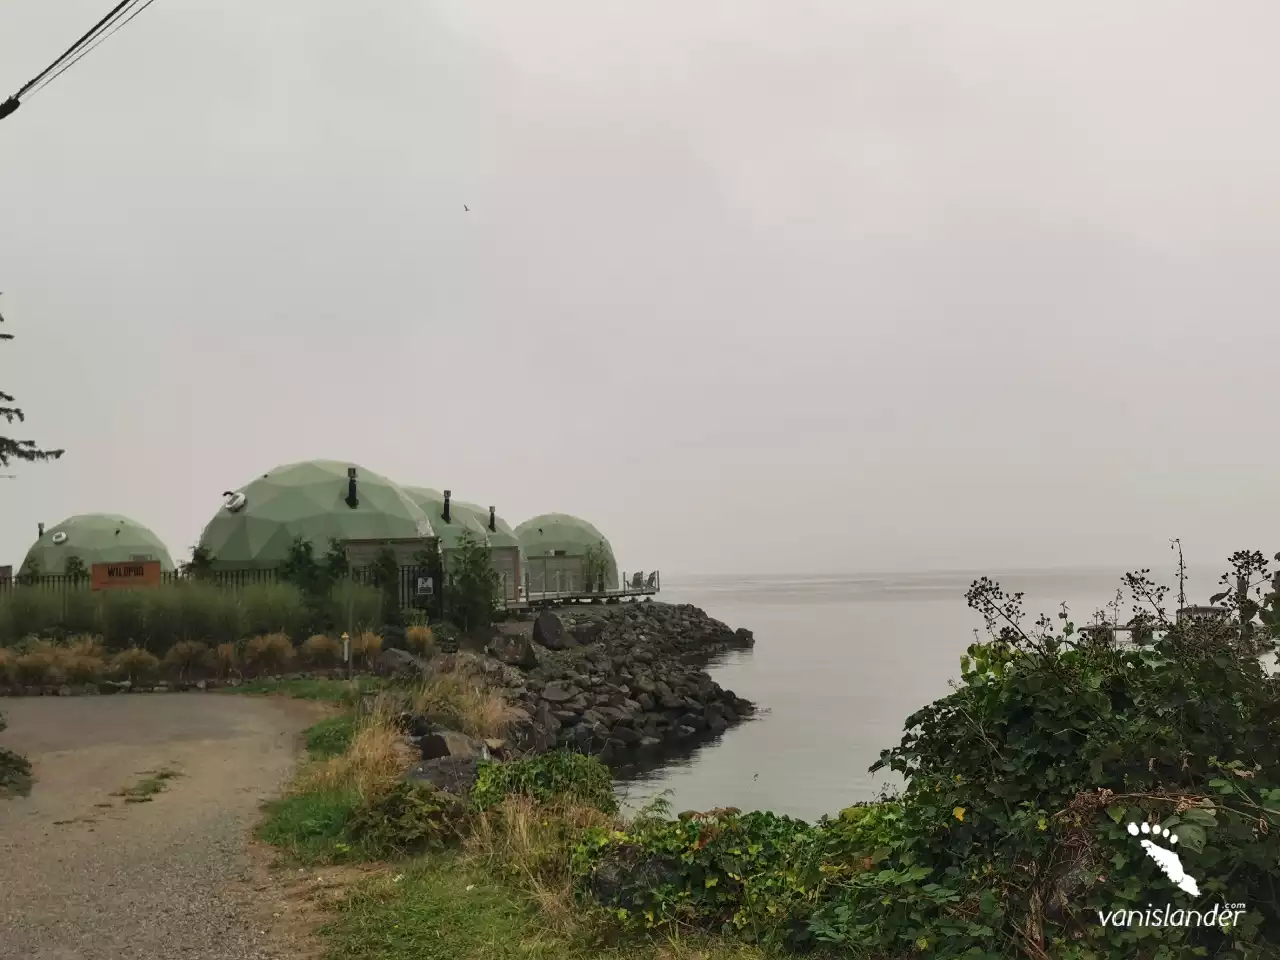 View of the  Solar Geodesic Dome Nature House in Tofino,  Vancouver Island